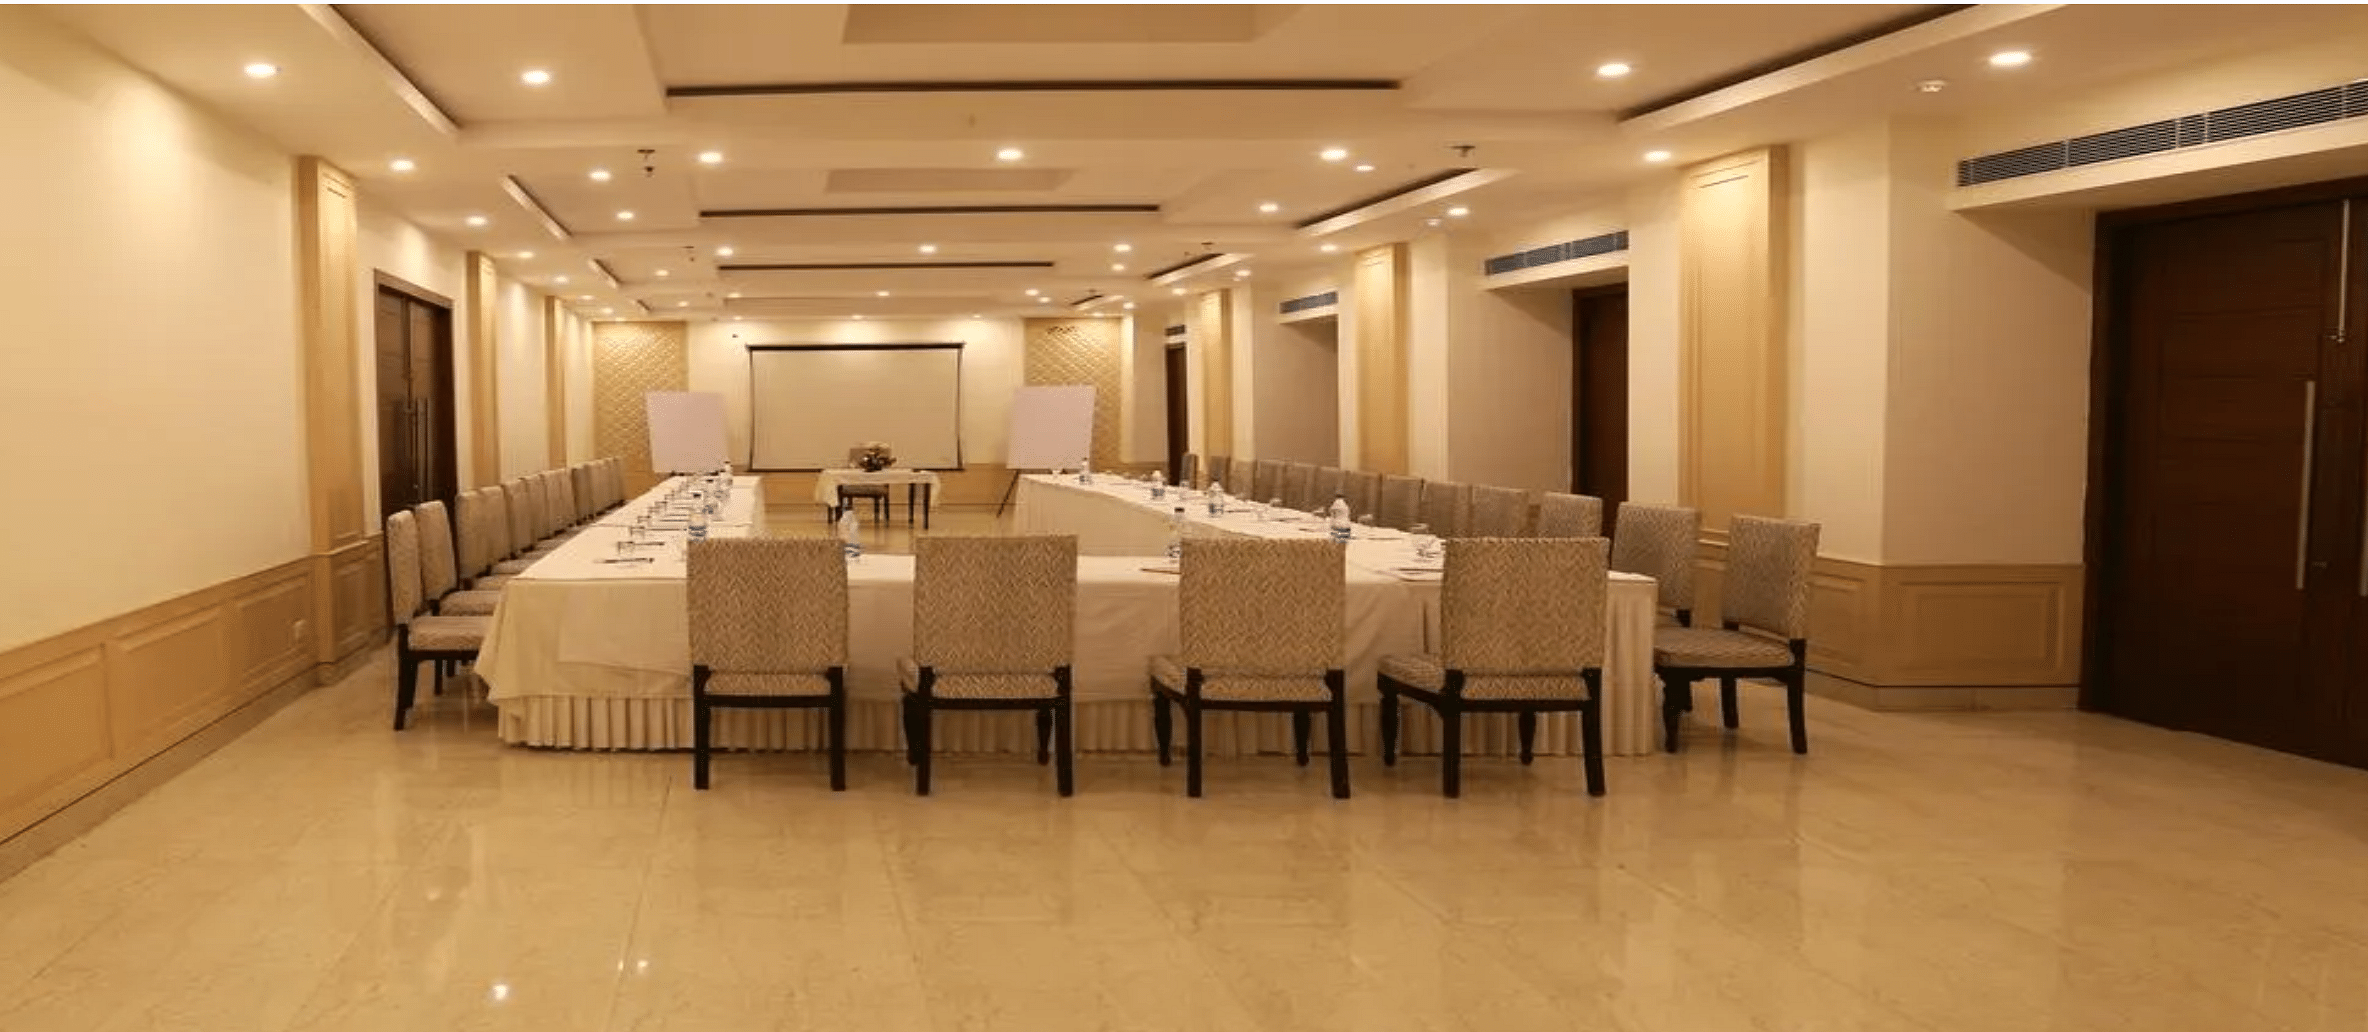 Dee Marks Hotel And Resorts in NH 8, Delhi